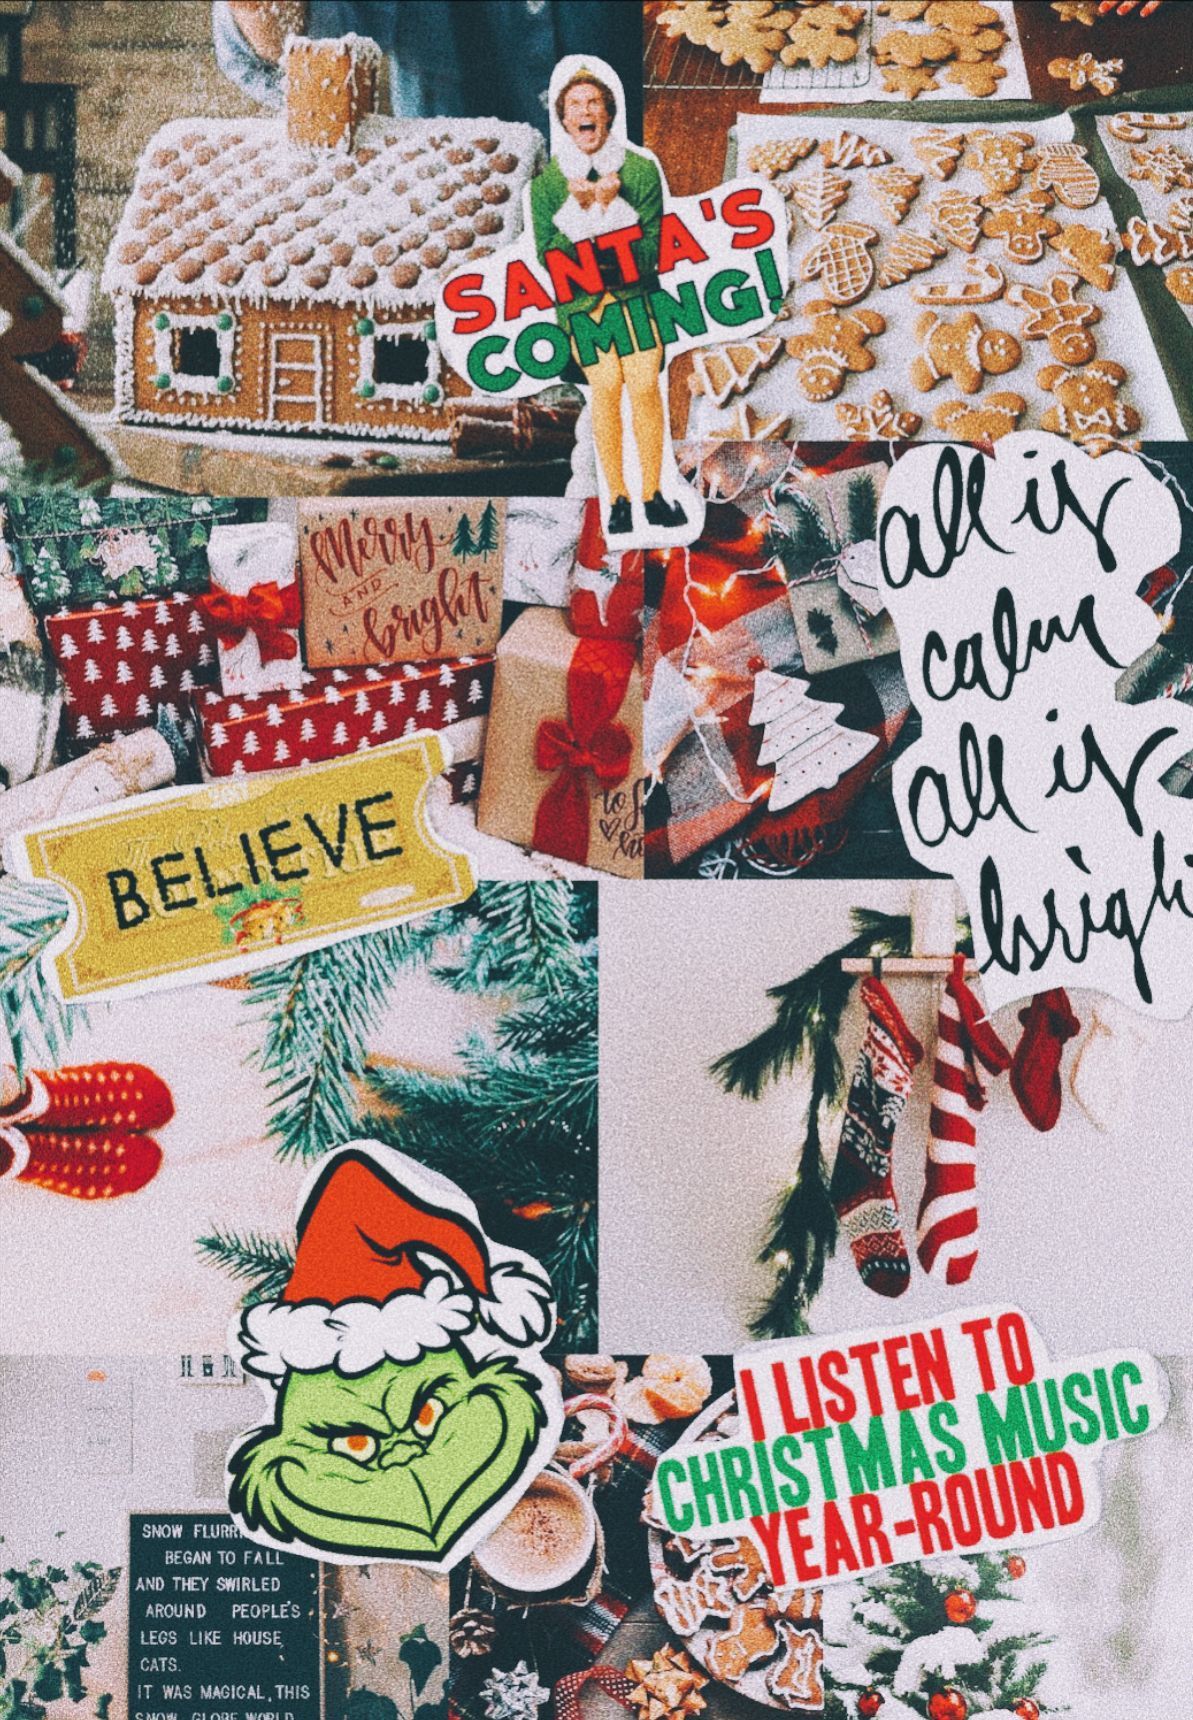 Christmas Collage Laptop Wallpaper Free Christmas Collage Laptop Background